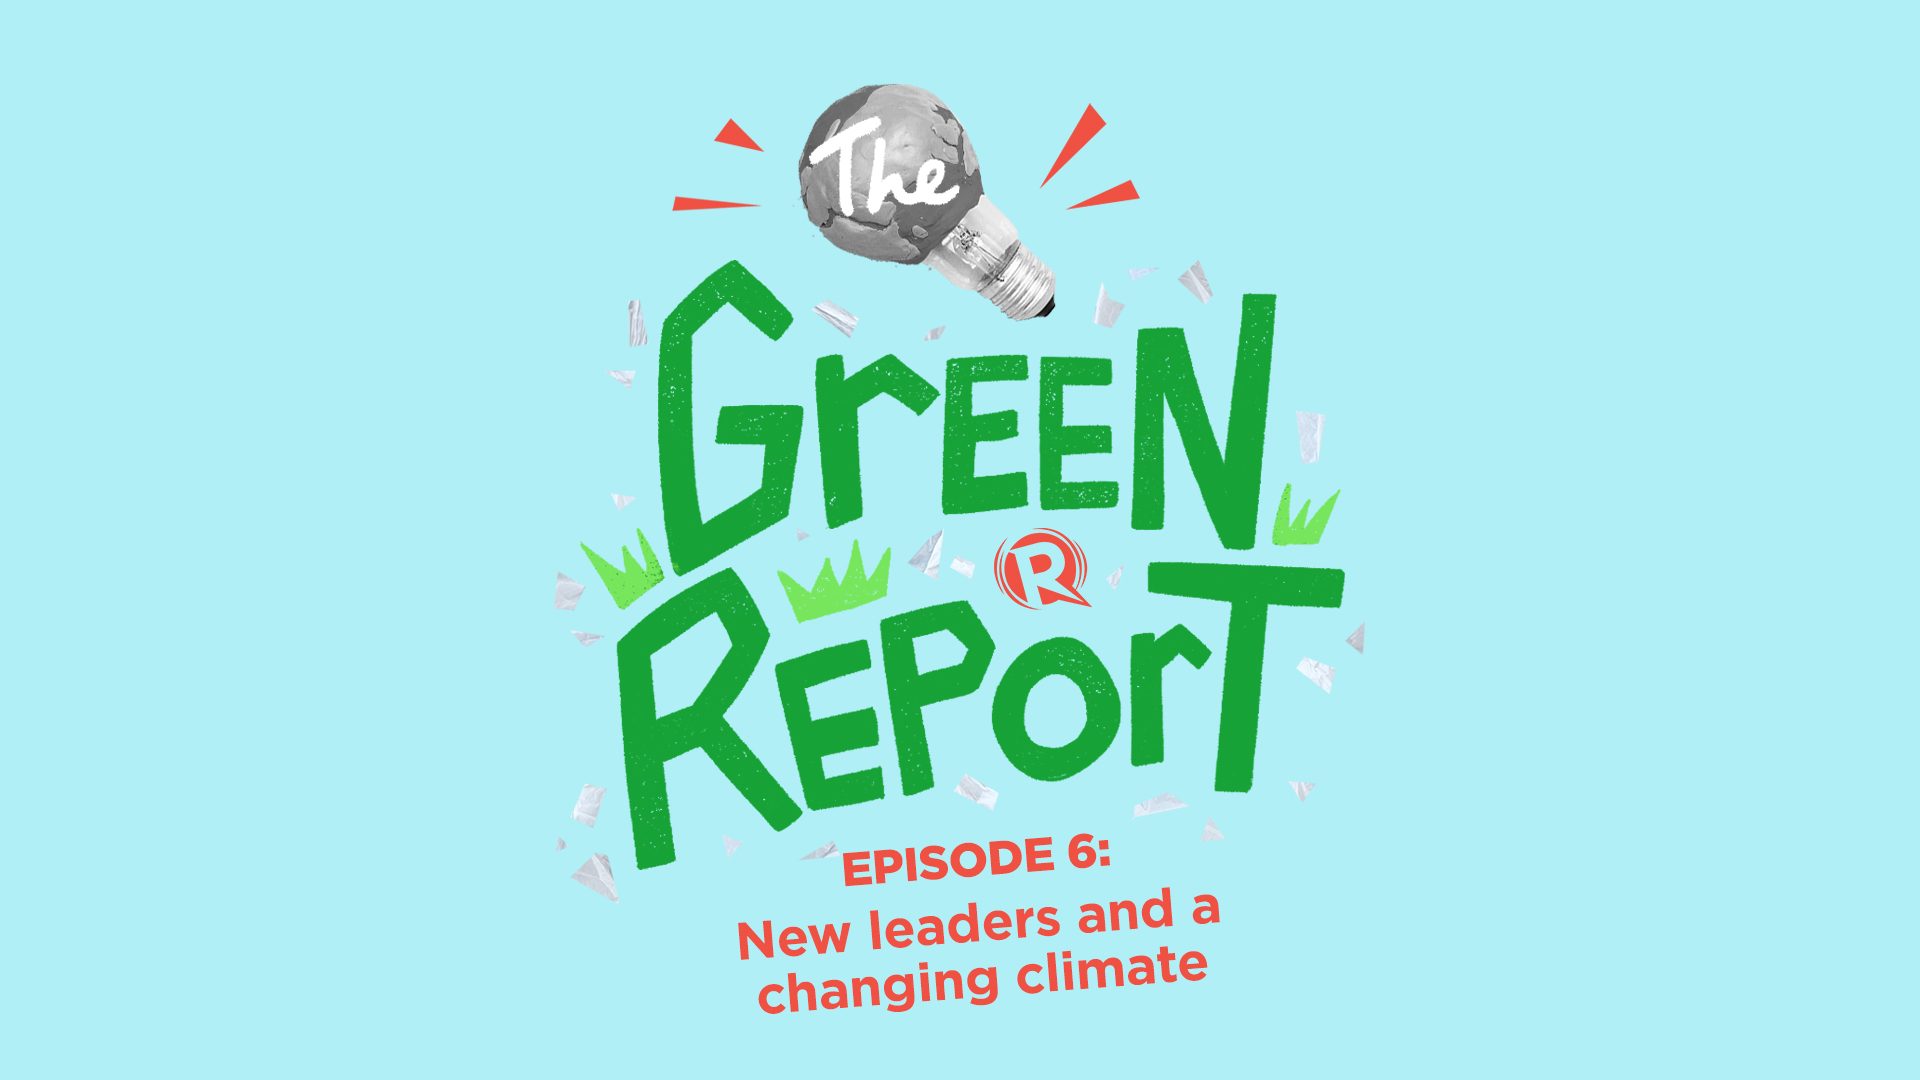 [PODCAST] The Green Report: New leaders and a changing climate